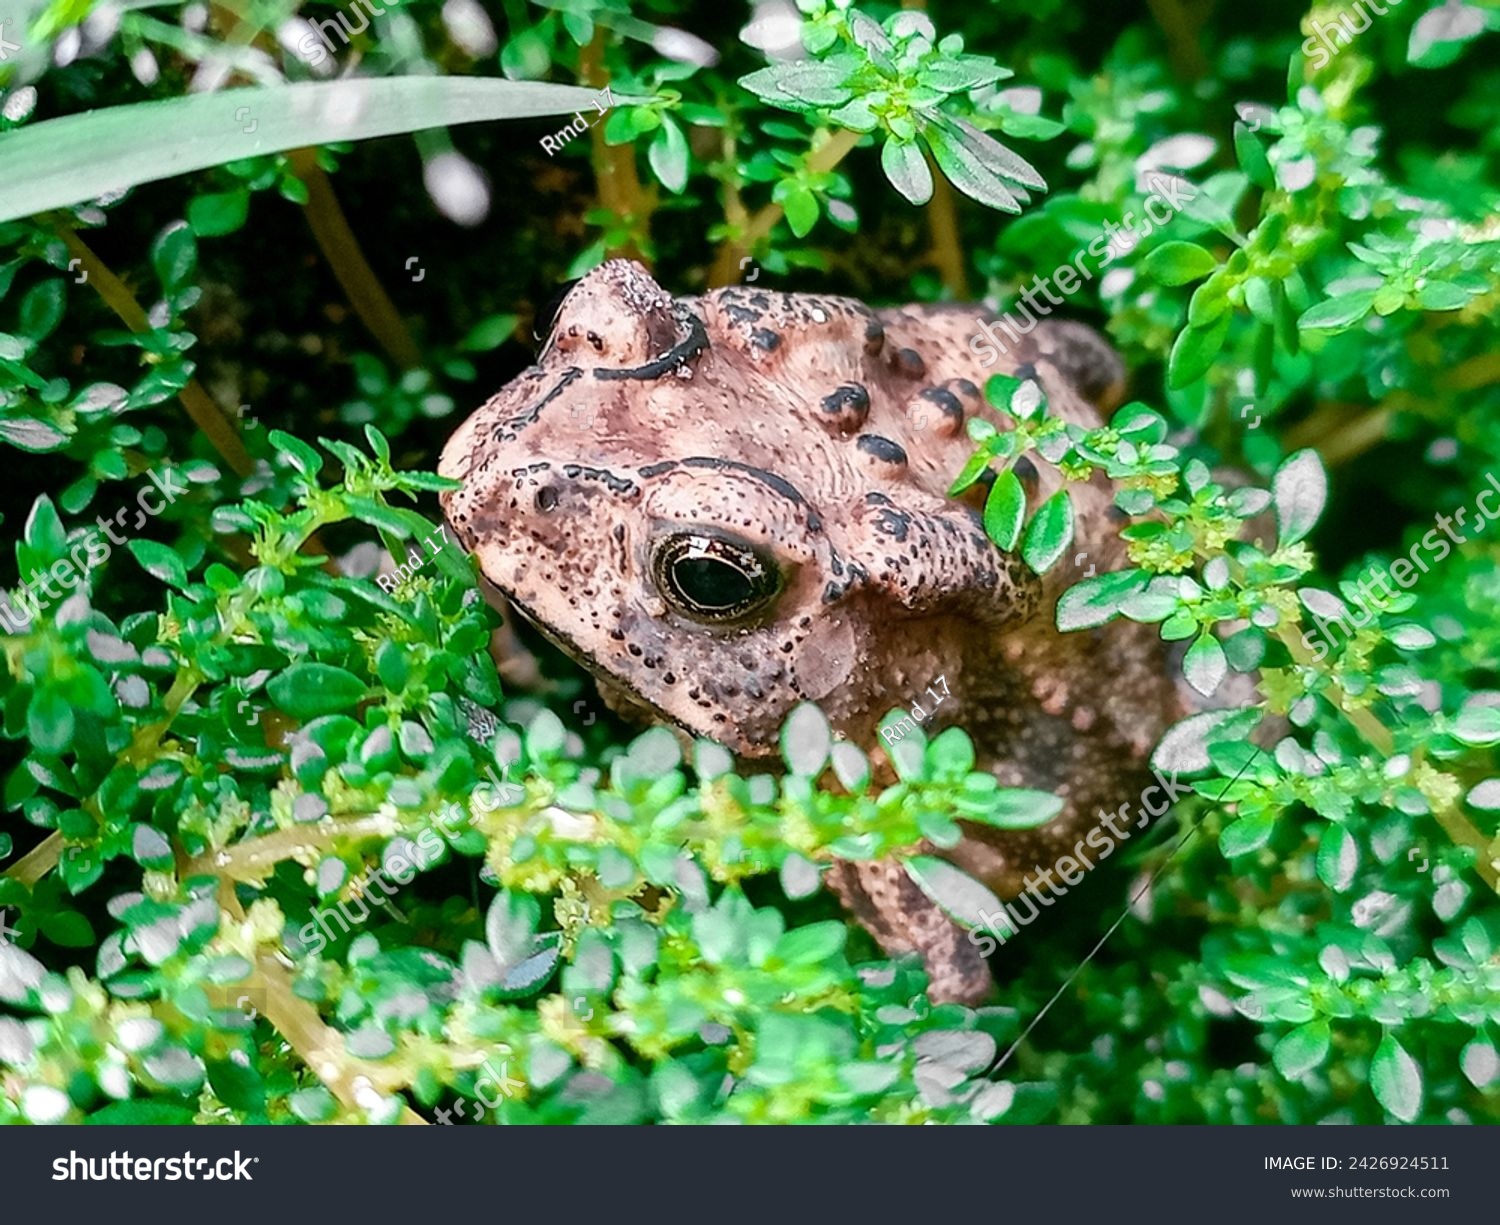 Toad sitting on mossy forest floor.
The moor frog (Rana arvalis) is a slim, reddish-brown, semiaquatic amphibian native to Europe and Asia. It is a member of the family Ranidae, or true frogs. #2426924511